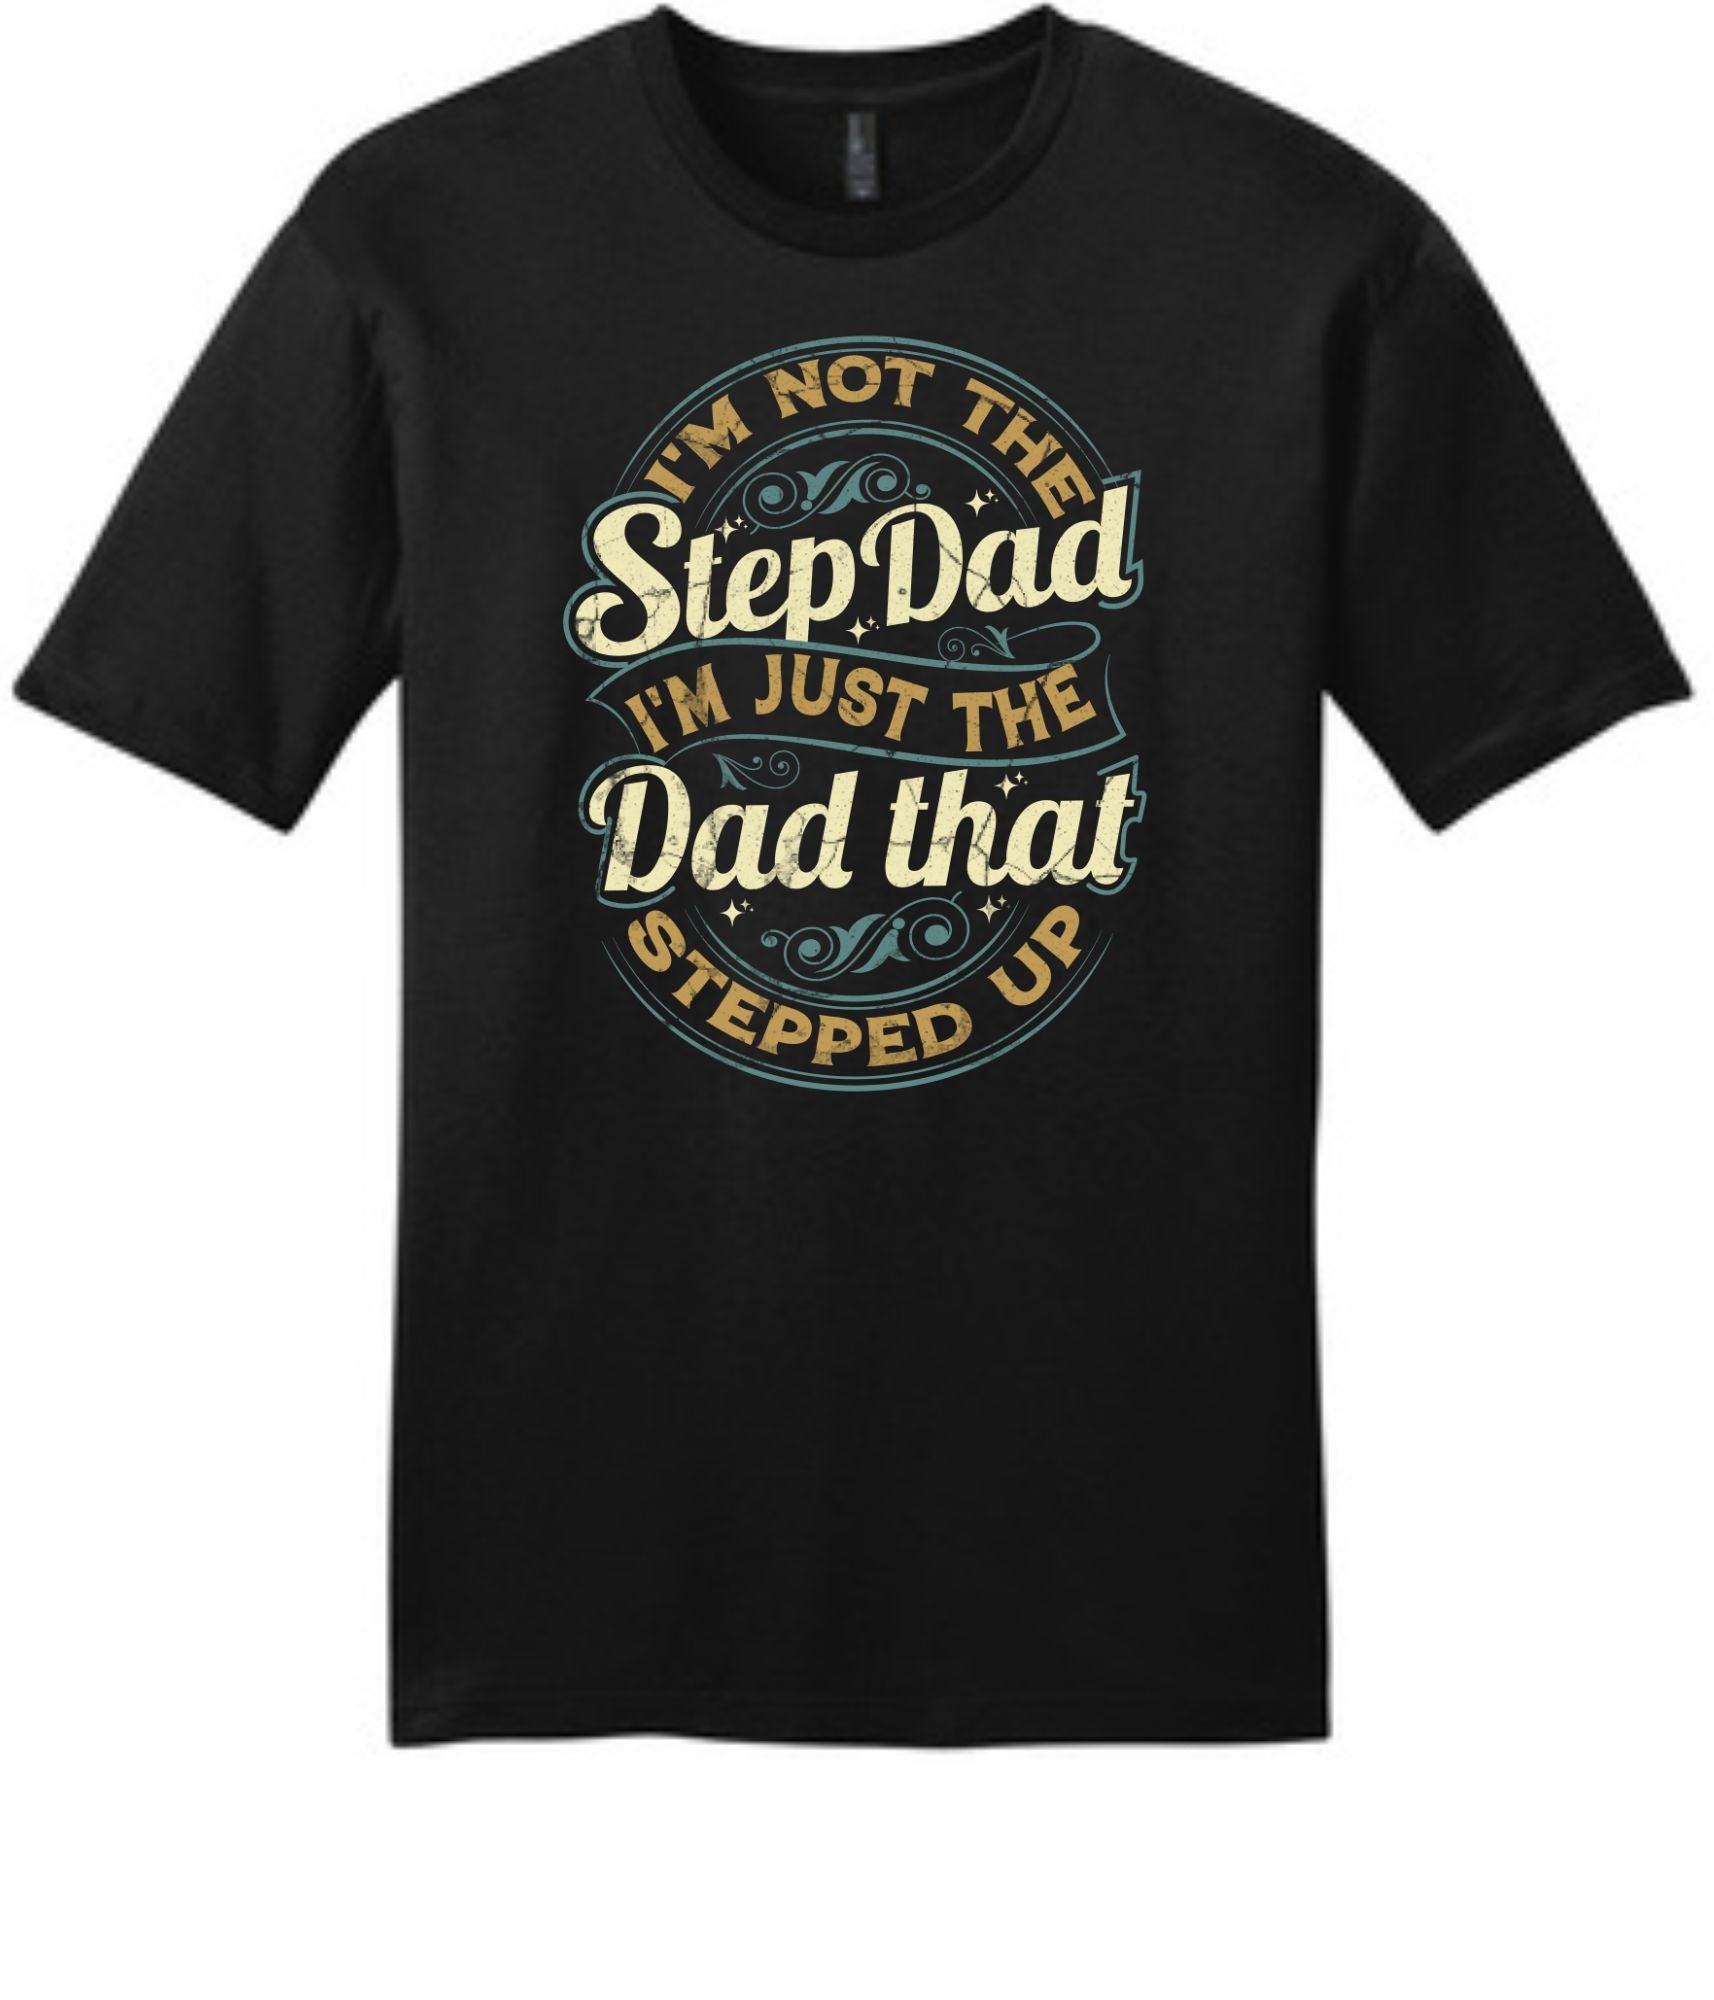 I'm not the step dad, I'm just the dad that stepped up black cotton tshirt. Great gift for Father's Day for the dad that stepped up.